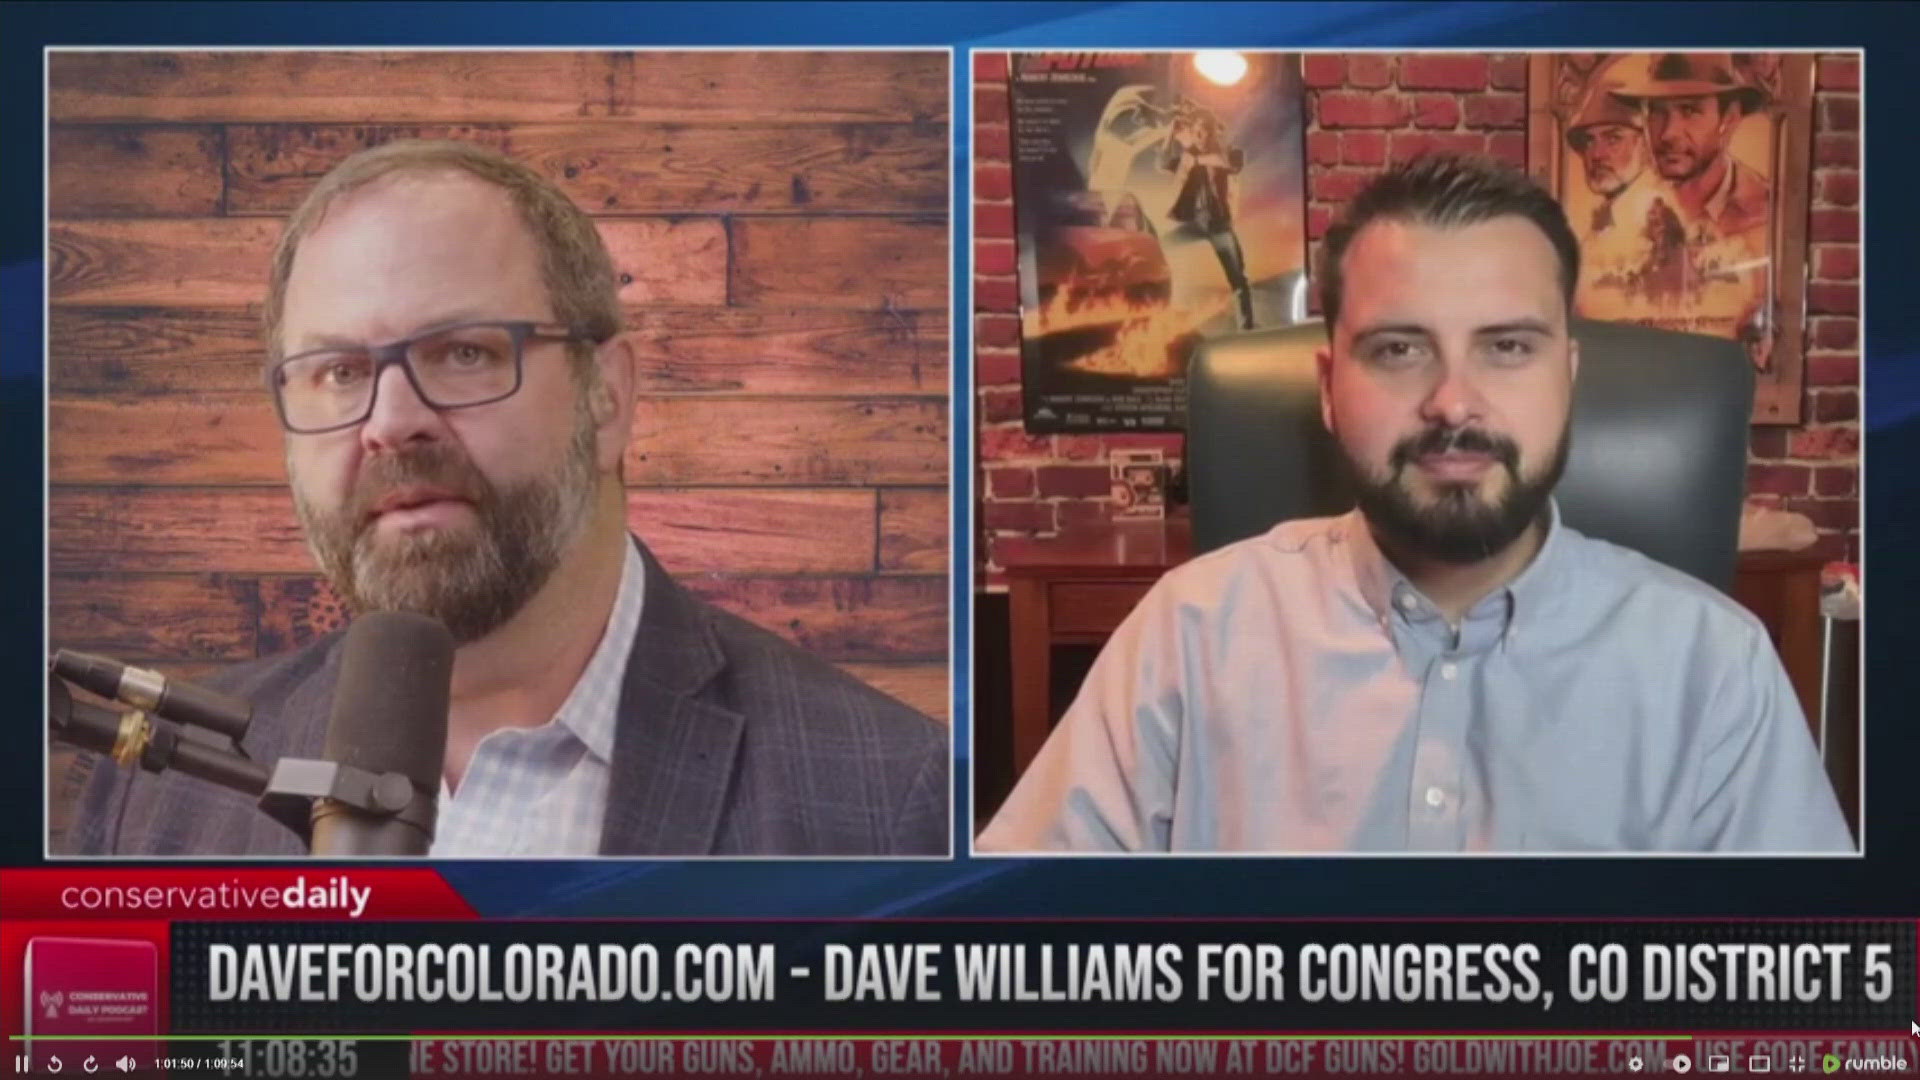 Dave Williams is pushing back on fellow Republicans' calls for his resignation and standing by his anti-gay bigotry.